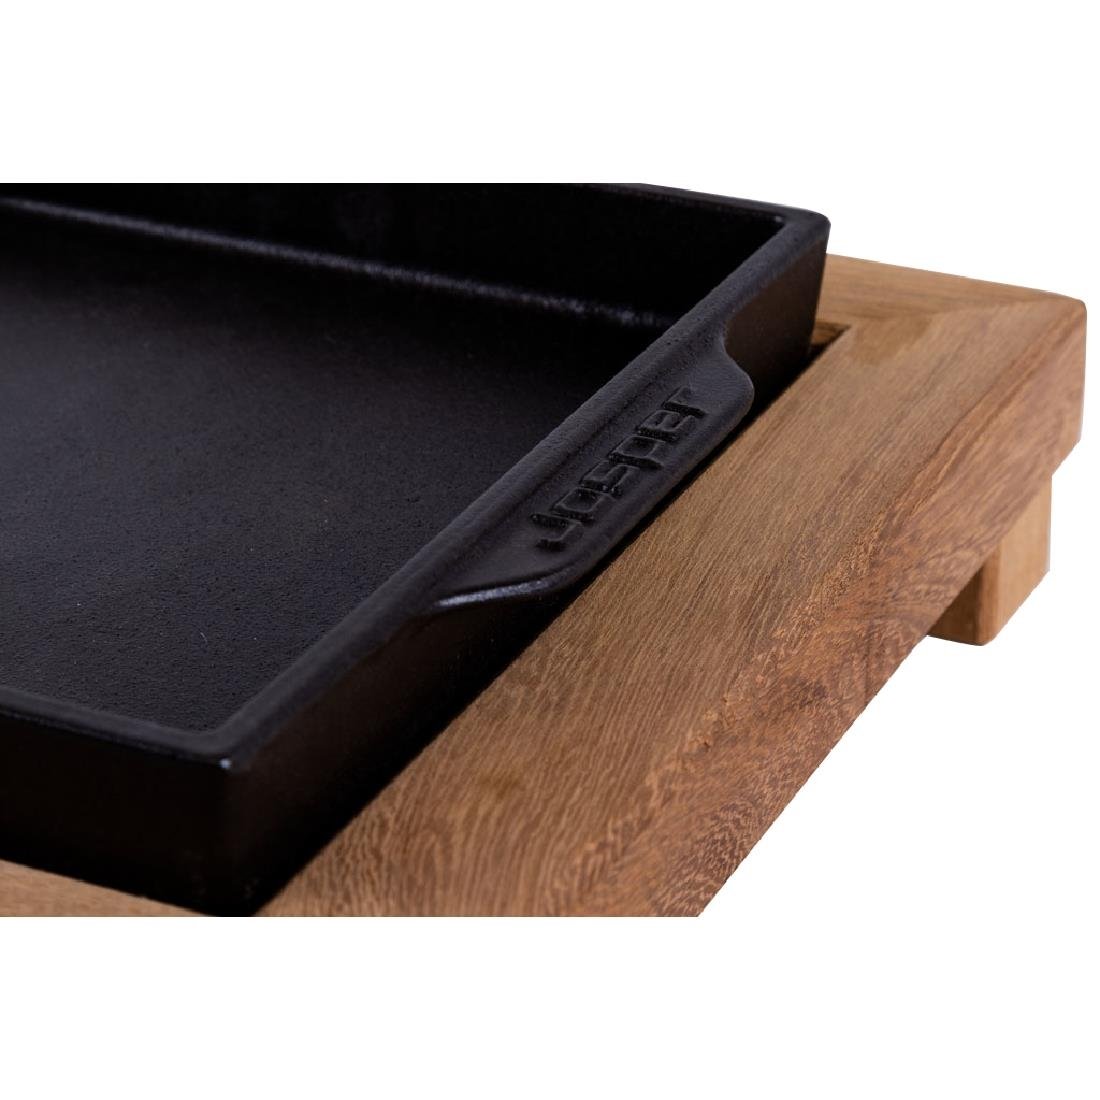 AT332 Josper Charcoal Oven Cast Iron Service Tray and Platter 460x150mm